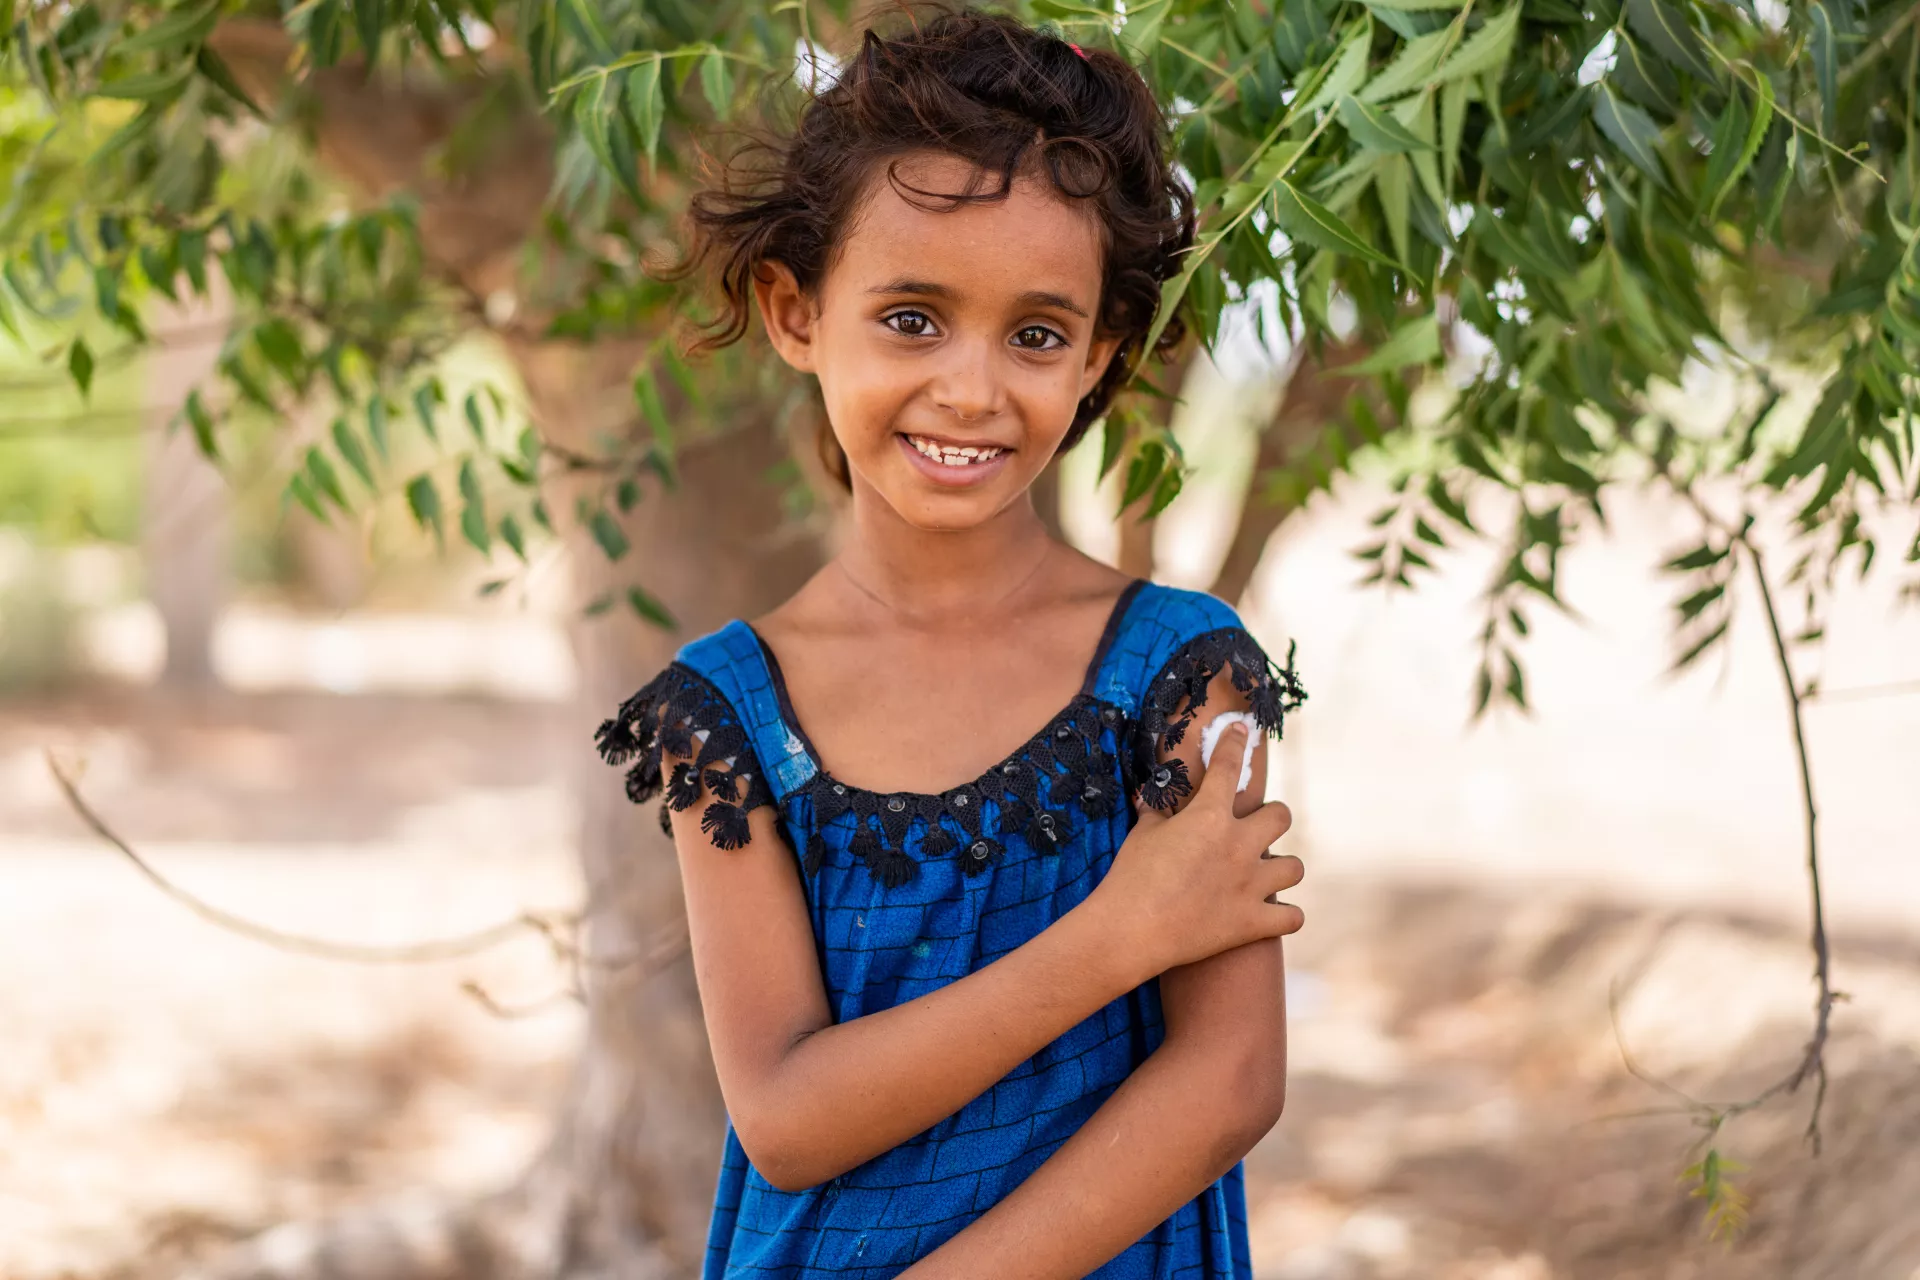 In Yemen, seven-year-old Hind Ali Nasser holds her arm after being vaccinated as part of an outreach campaign.